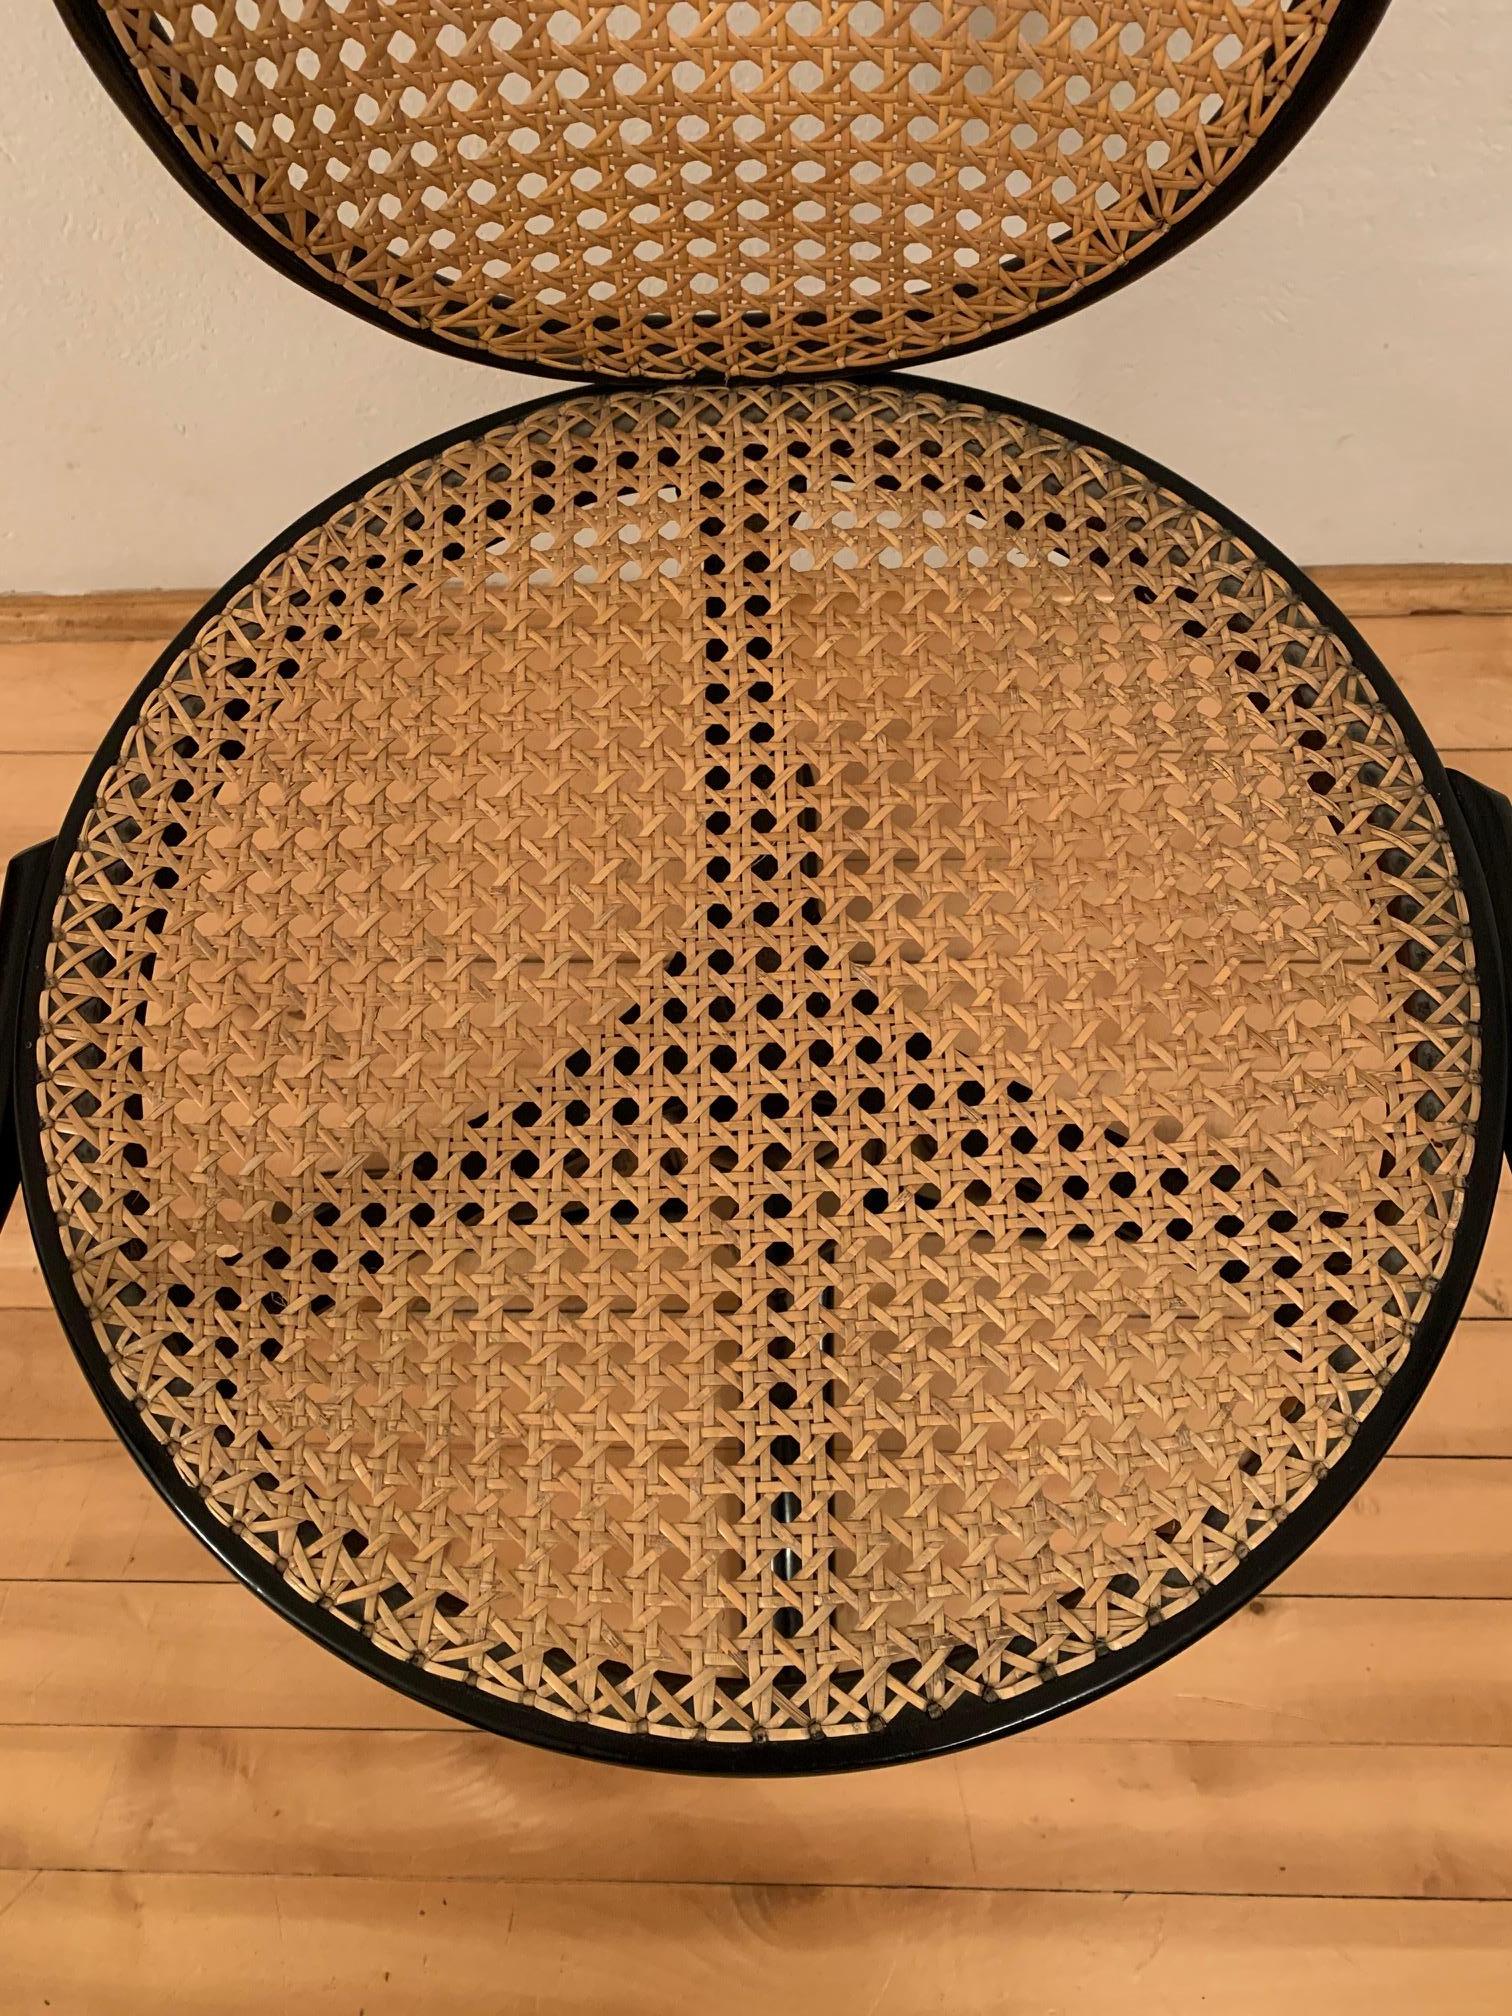 Vienna Secession Thonet Chair, ZPM Radomsko, Bentwood Model 5501, 1920s For Sale